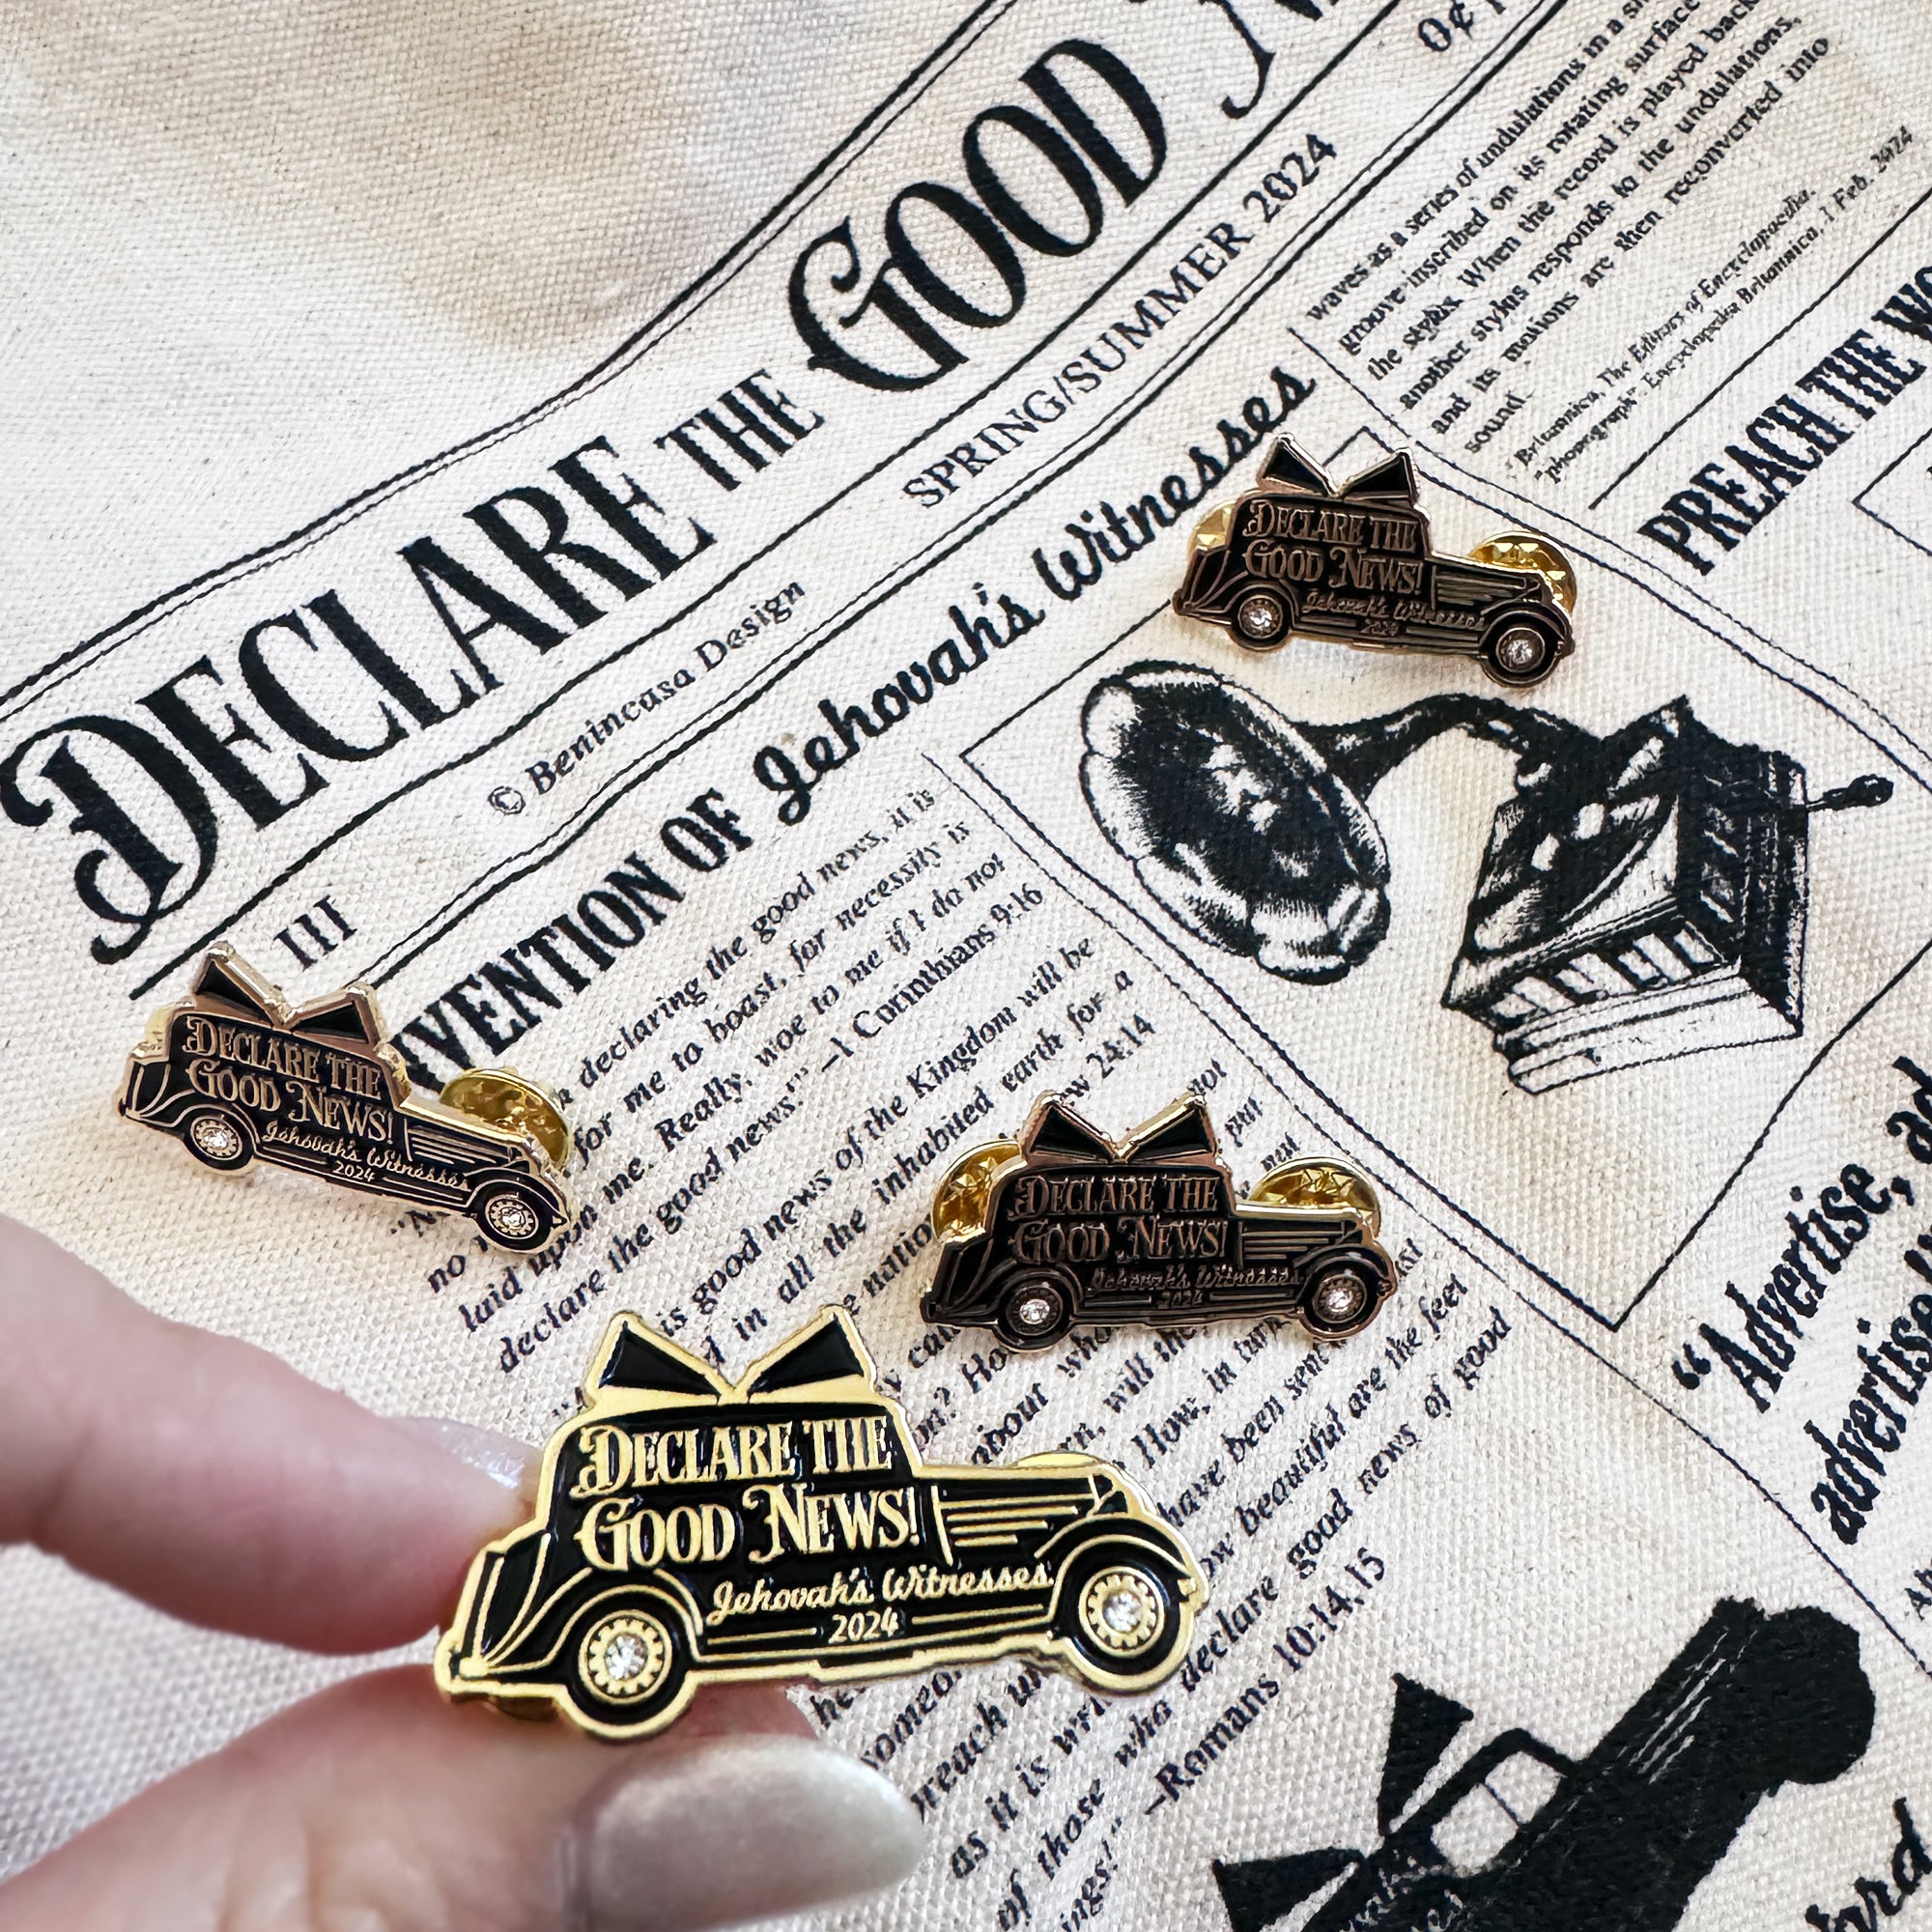 SPECIAL EDITION Metal Enamel Pin: 2024 “Declare the Good News”!